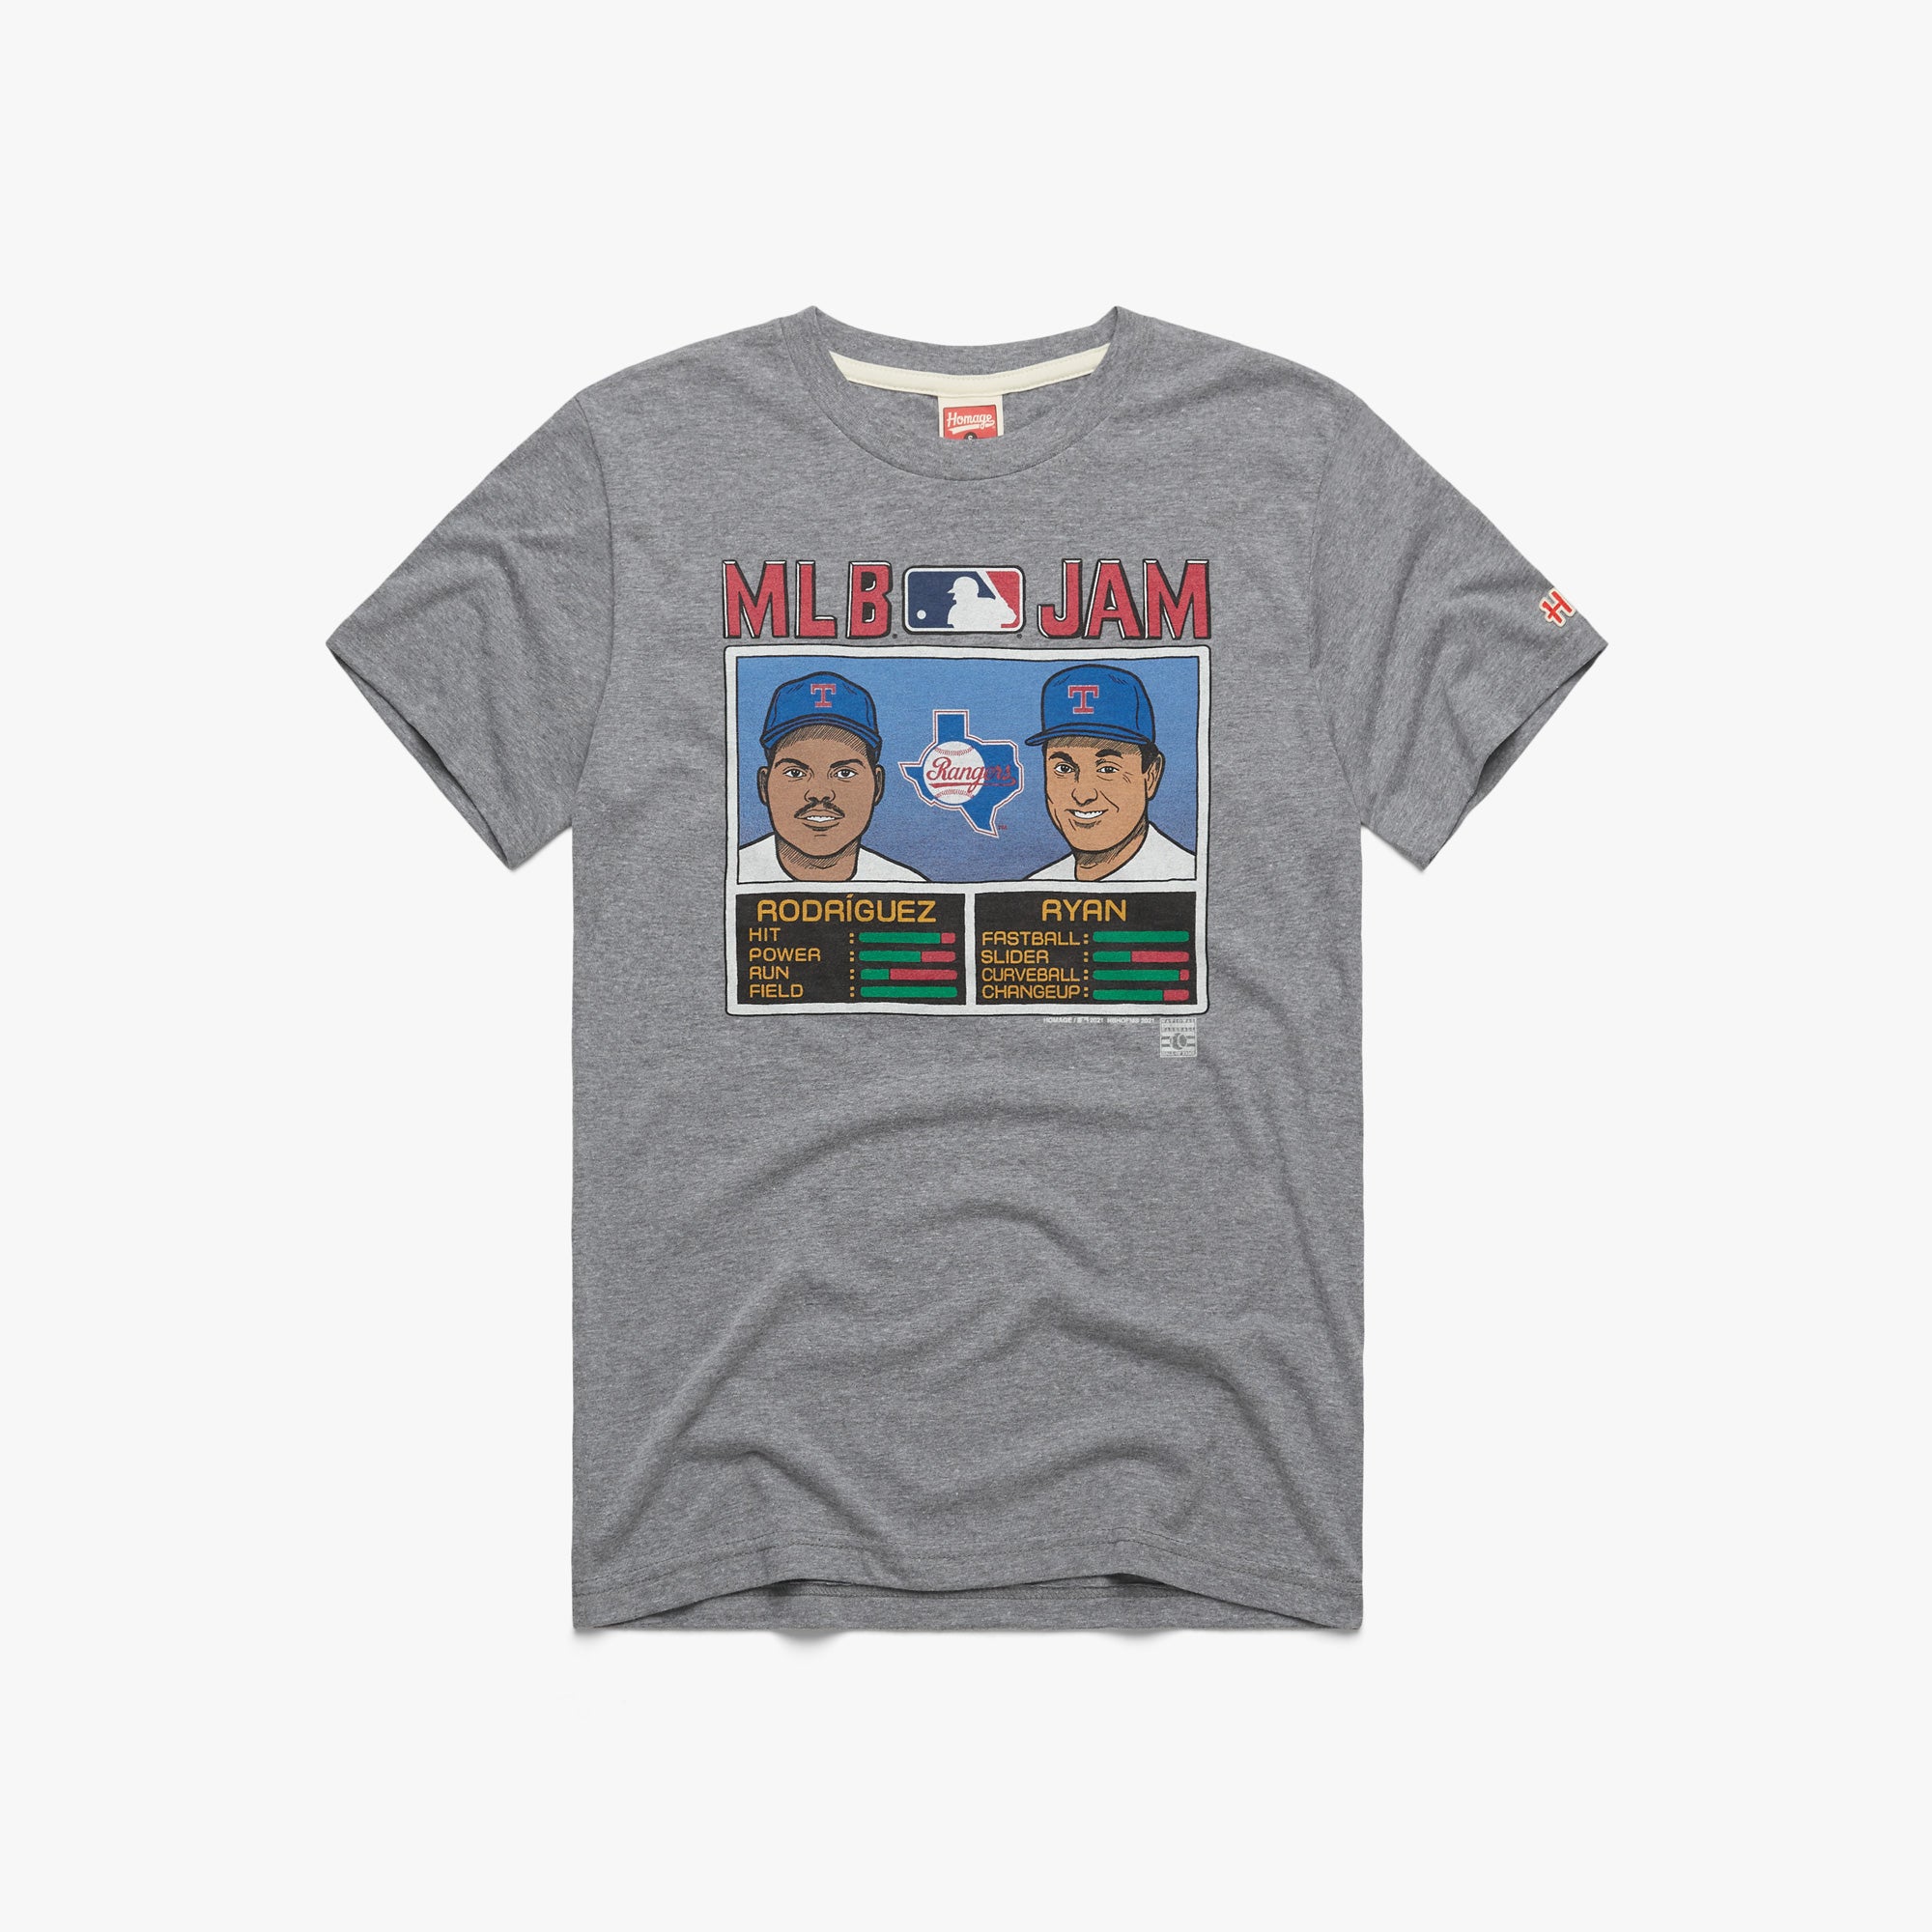 MLB Jam Rangers Rodriguez and Ryan T-Shirt from Homage. | Grey | Vintage Apparel from Homage.